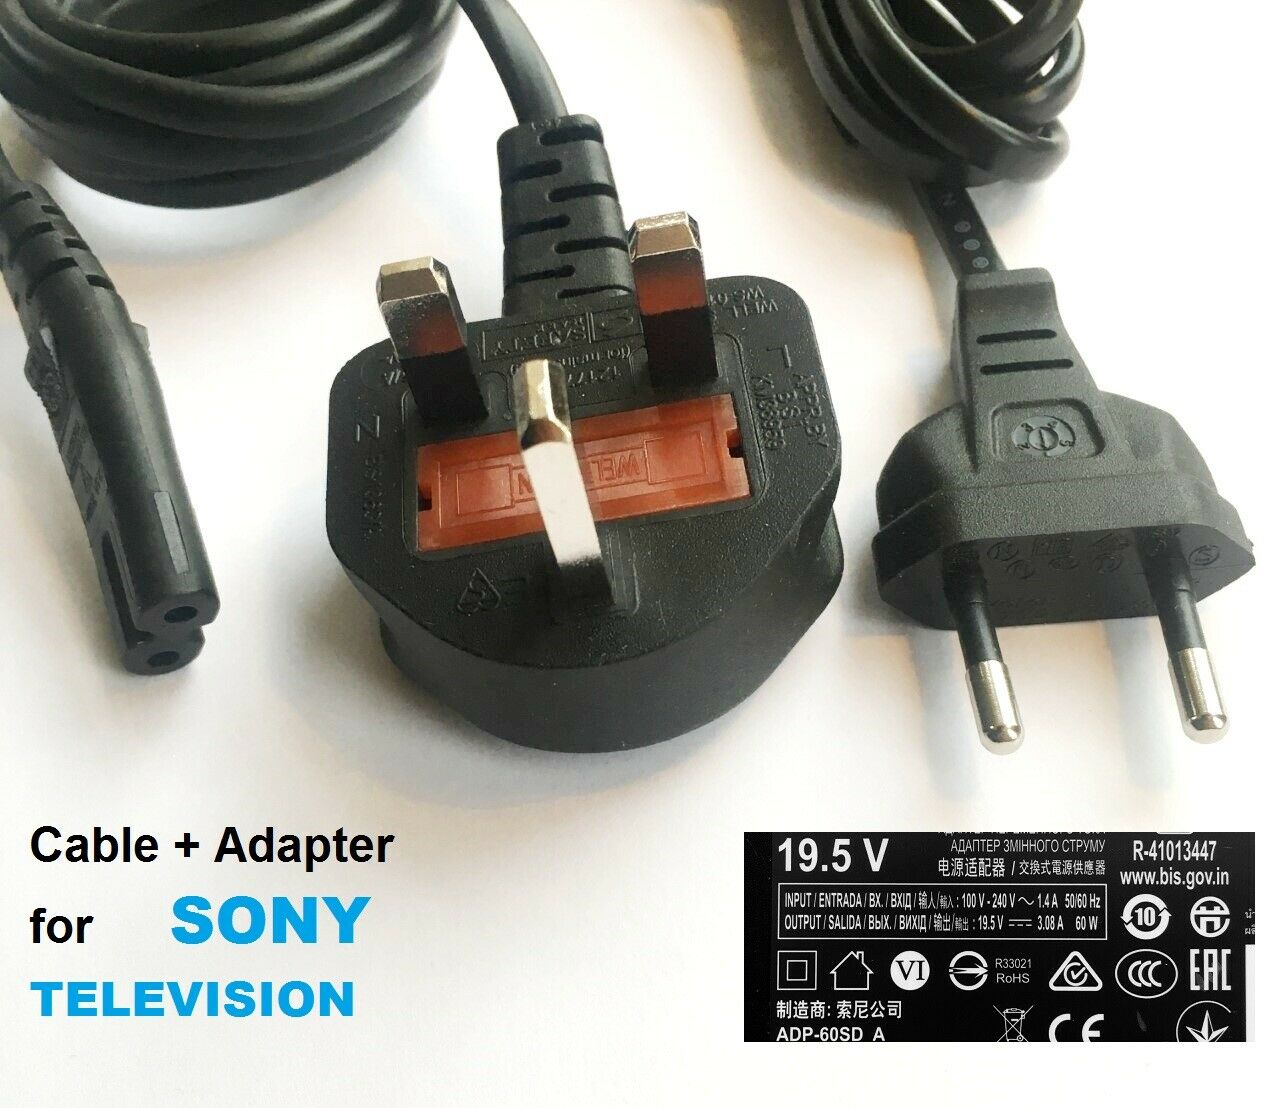 ACDP-060D01, 19.5V 3.08A 60W, FOR SONY TV 19.5V 3.08A 60W ACDP-060D01, , FOR SONY TV This power supply may also fit - Click Image to Close